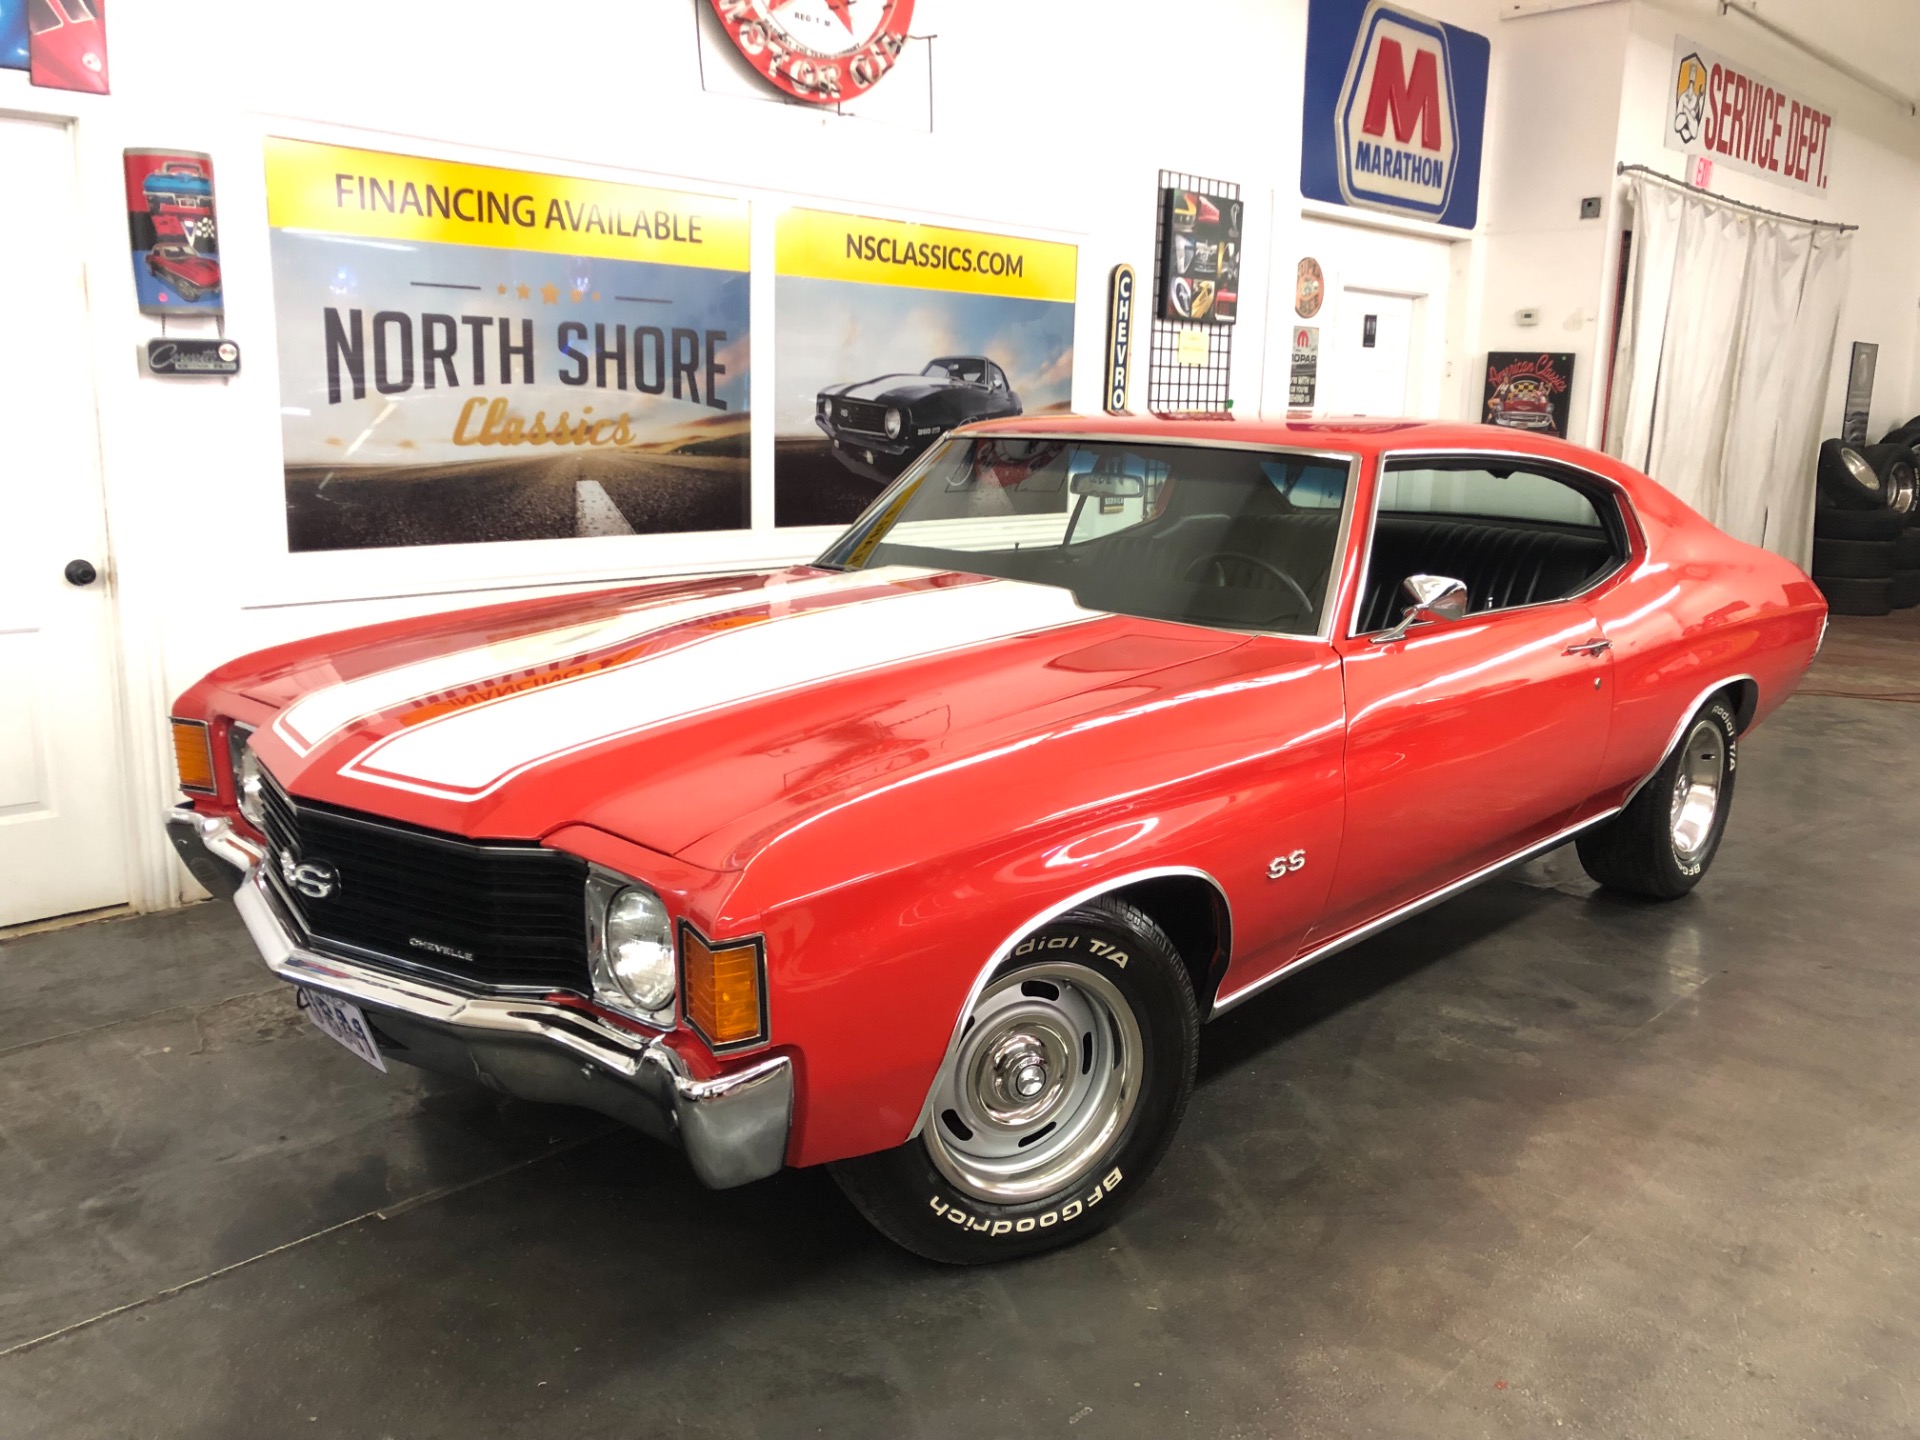 Used 1972 Chevrolet Chevelle -SUPER SPORT TRIBUTE - CUSTOM PEARL PAINT - A/C - NEW ENGINE | Mundelein, IL